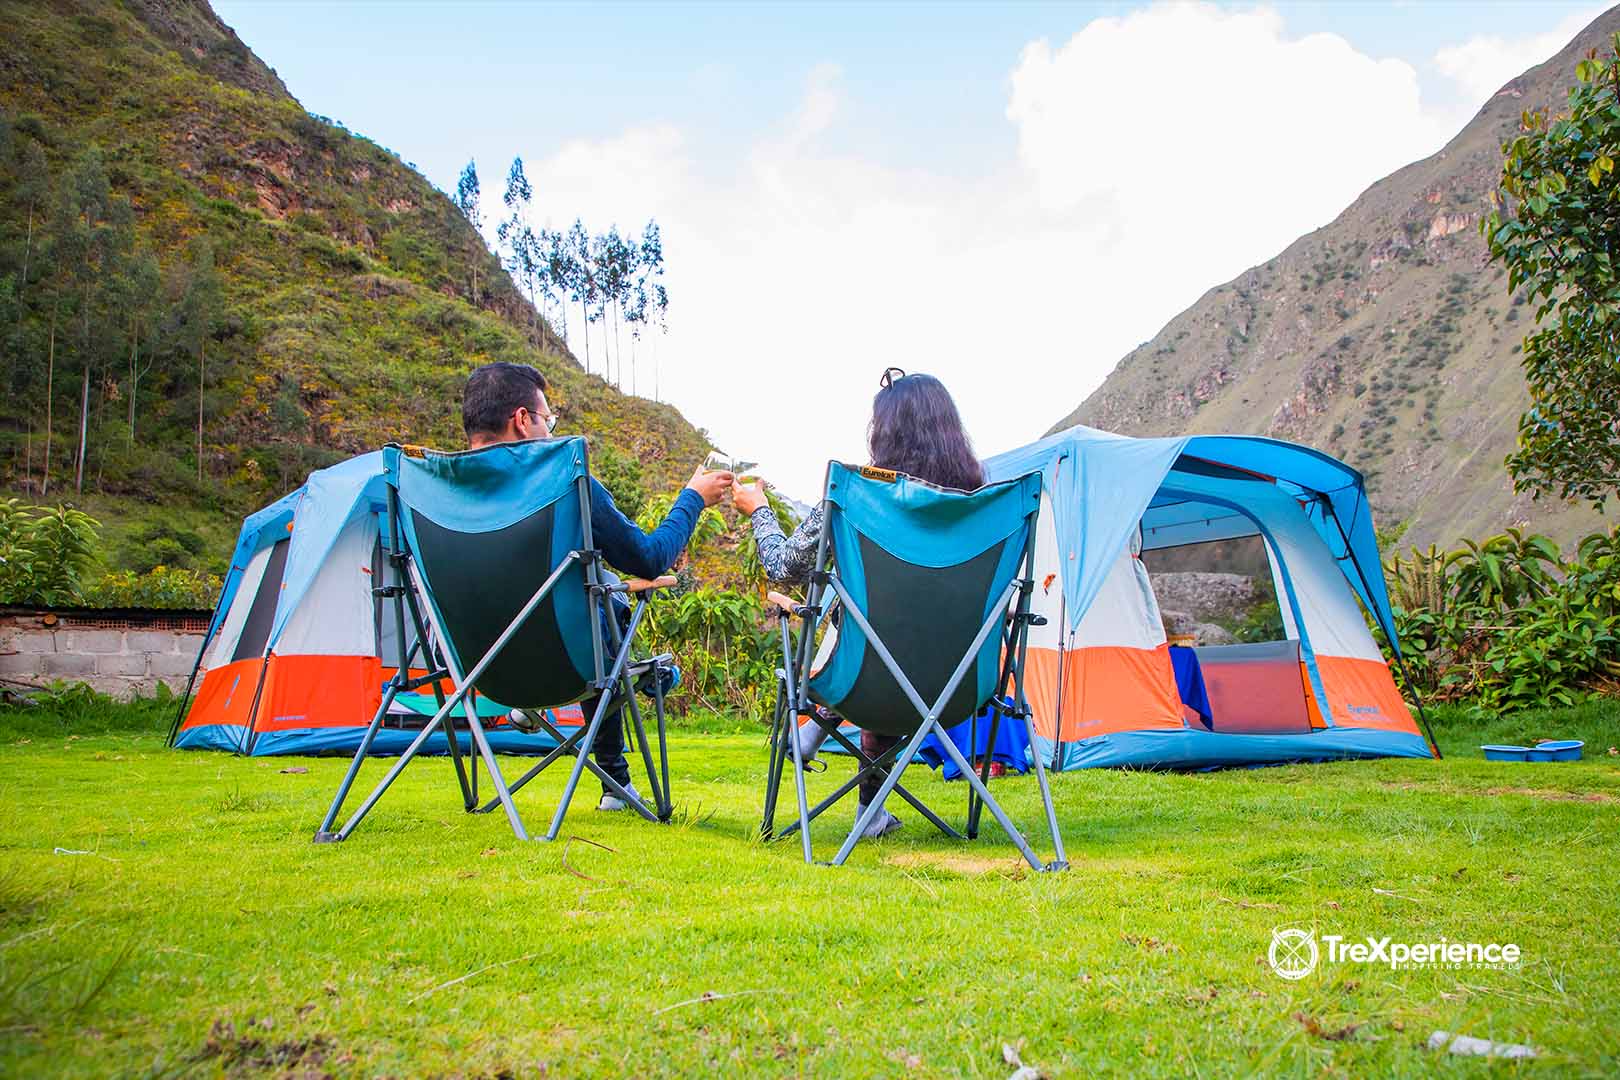 Camping on the Inca Trail | TeXperience